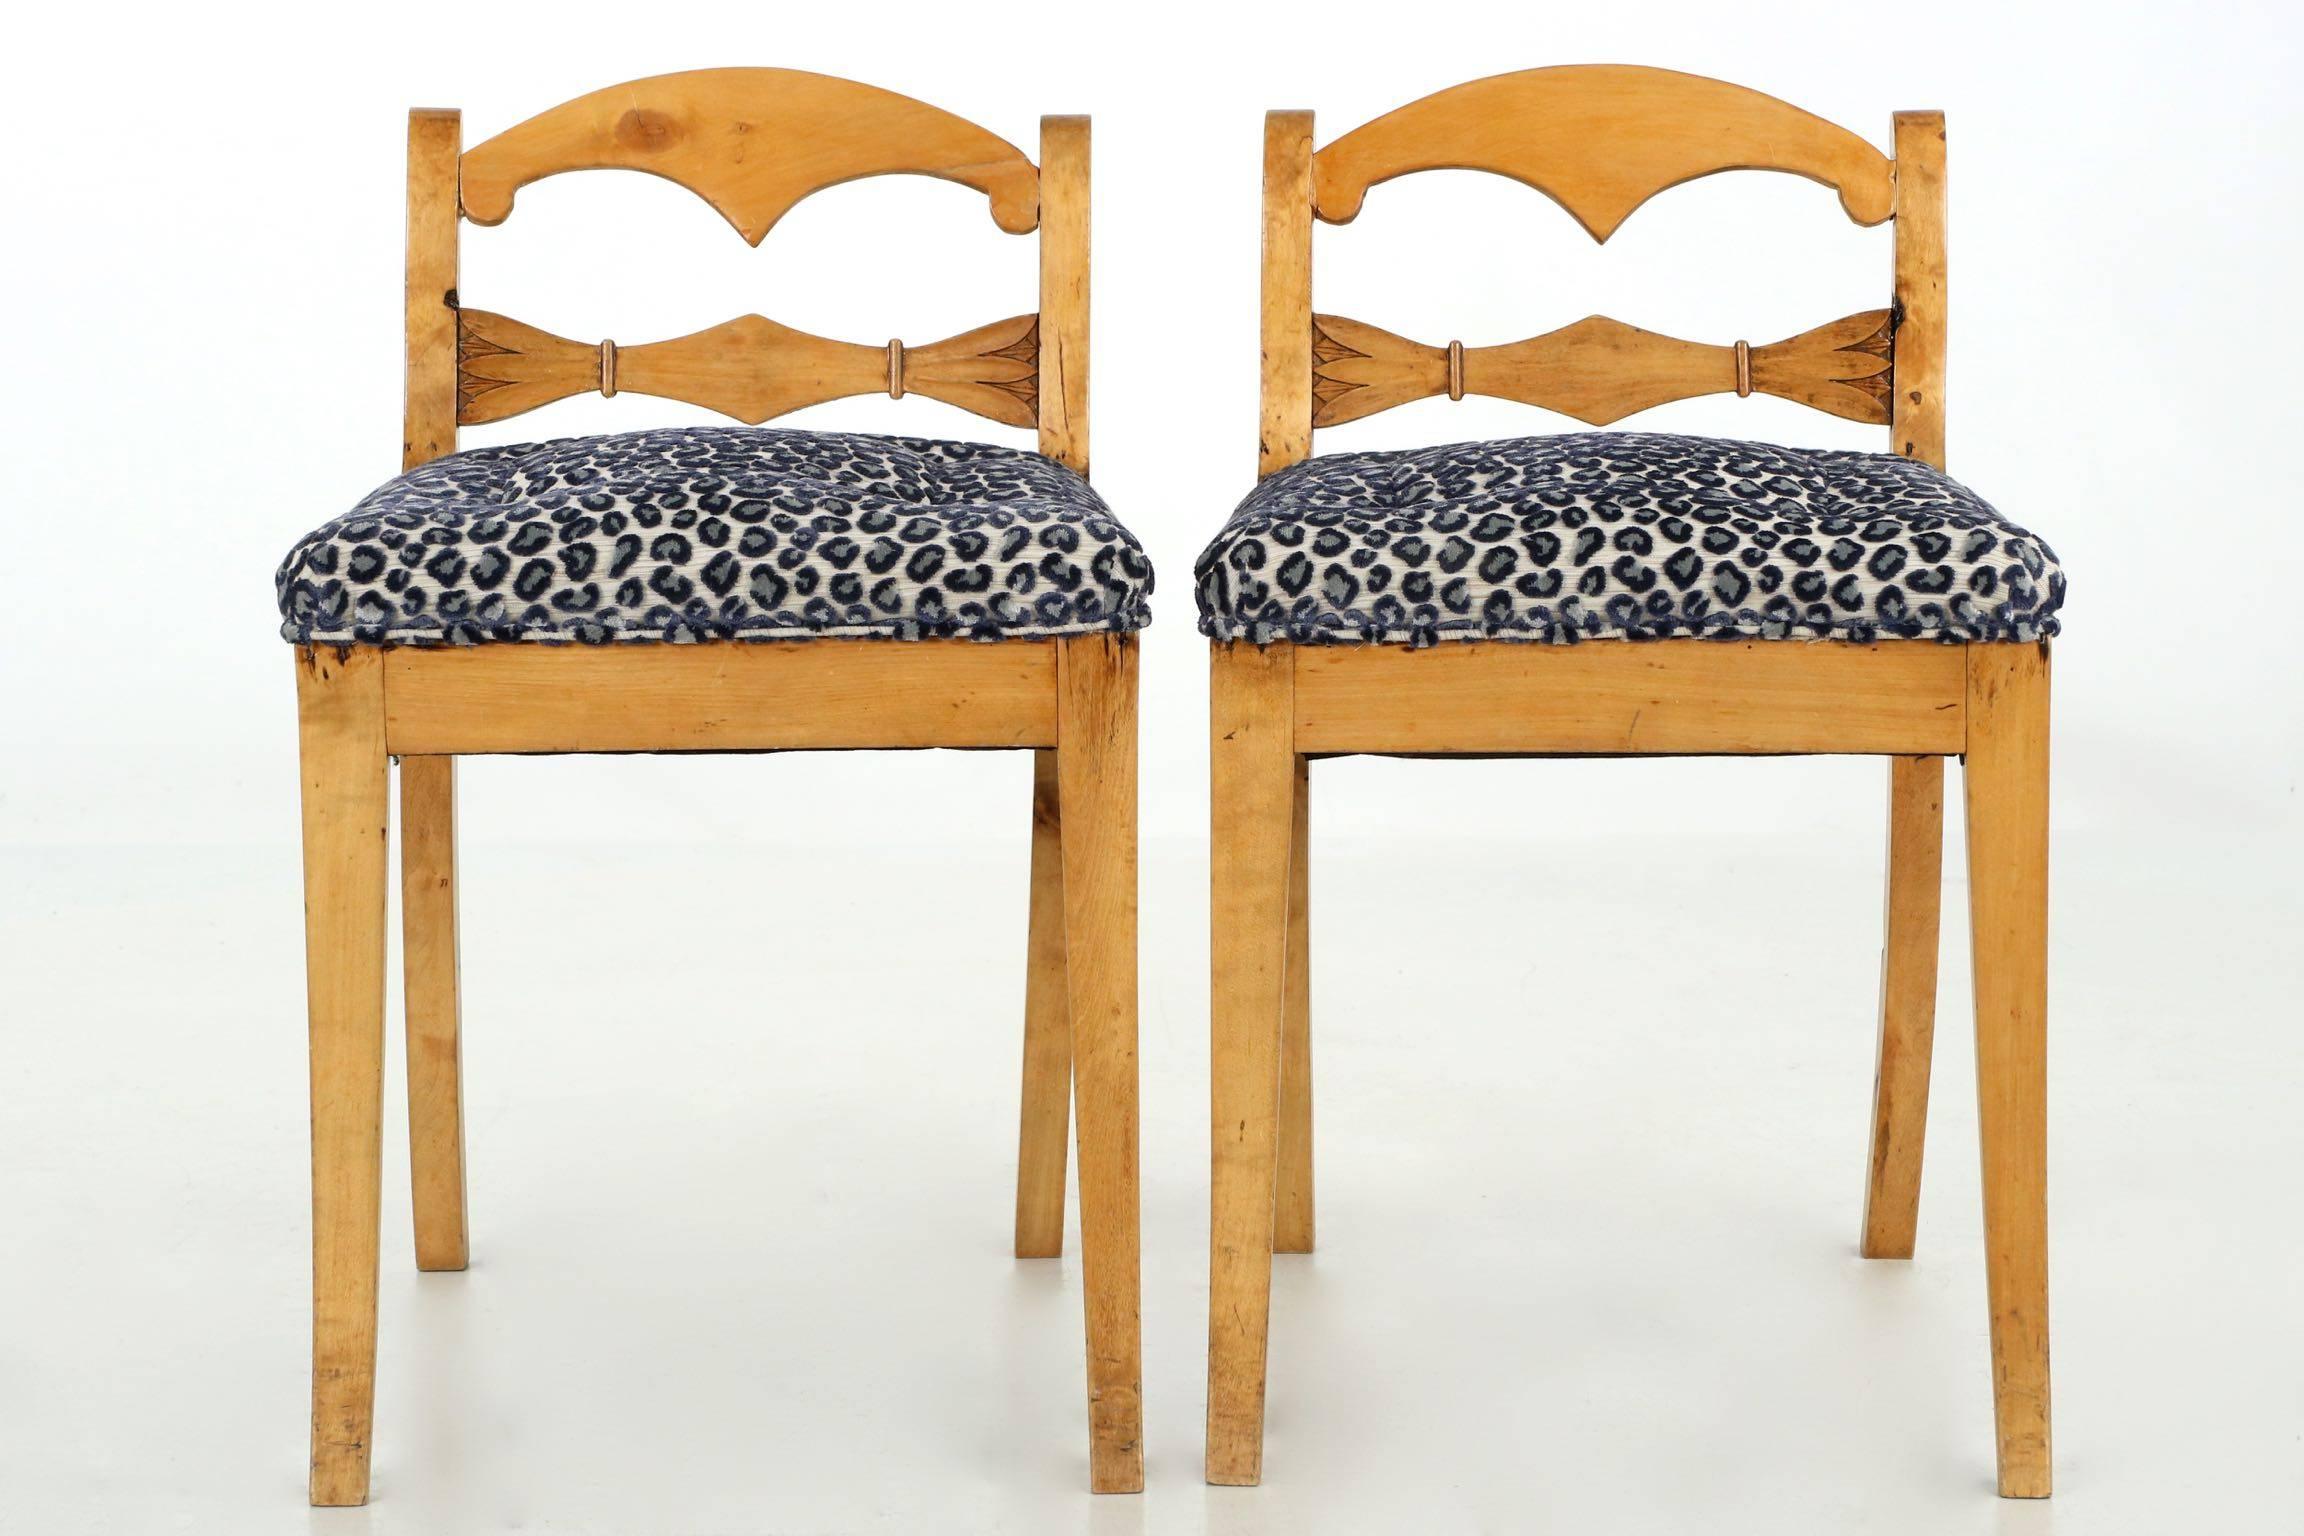 A pair of refined side chairs done in gorgeous honey colored fruitwood, and although they were created in the late 19th century have a highly modern elemental aesthetic. Not a bit overdone in any of its lines or proportions, it sits in